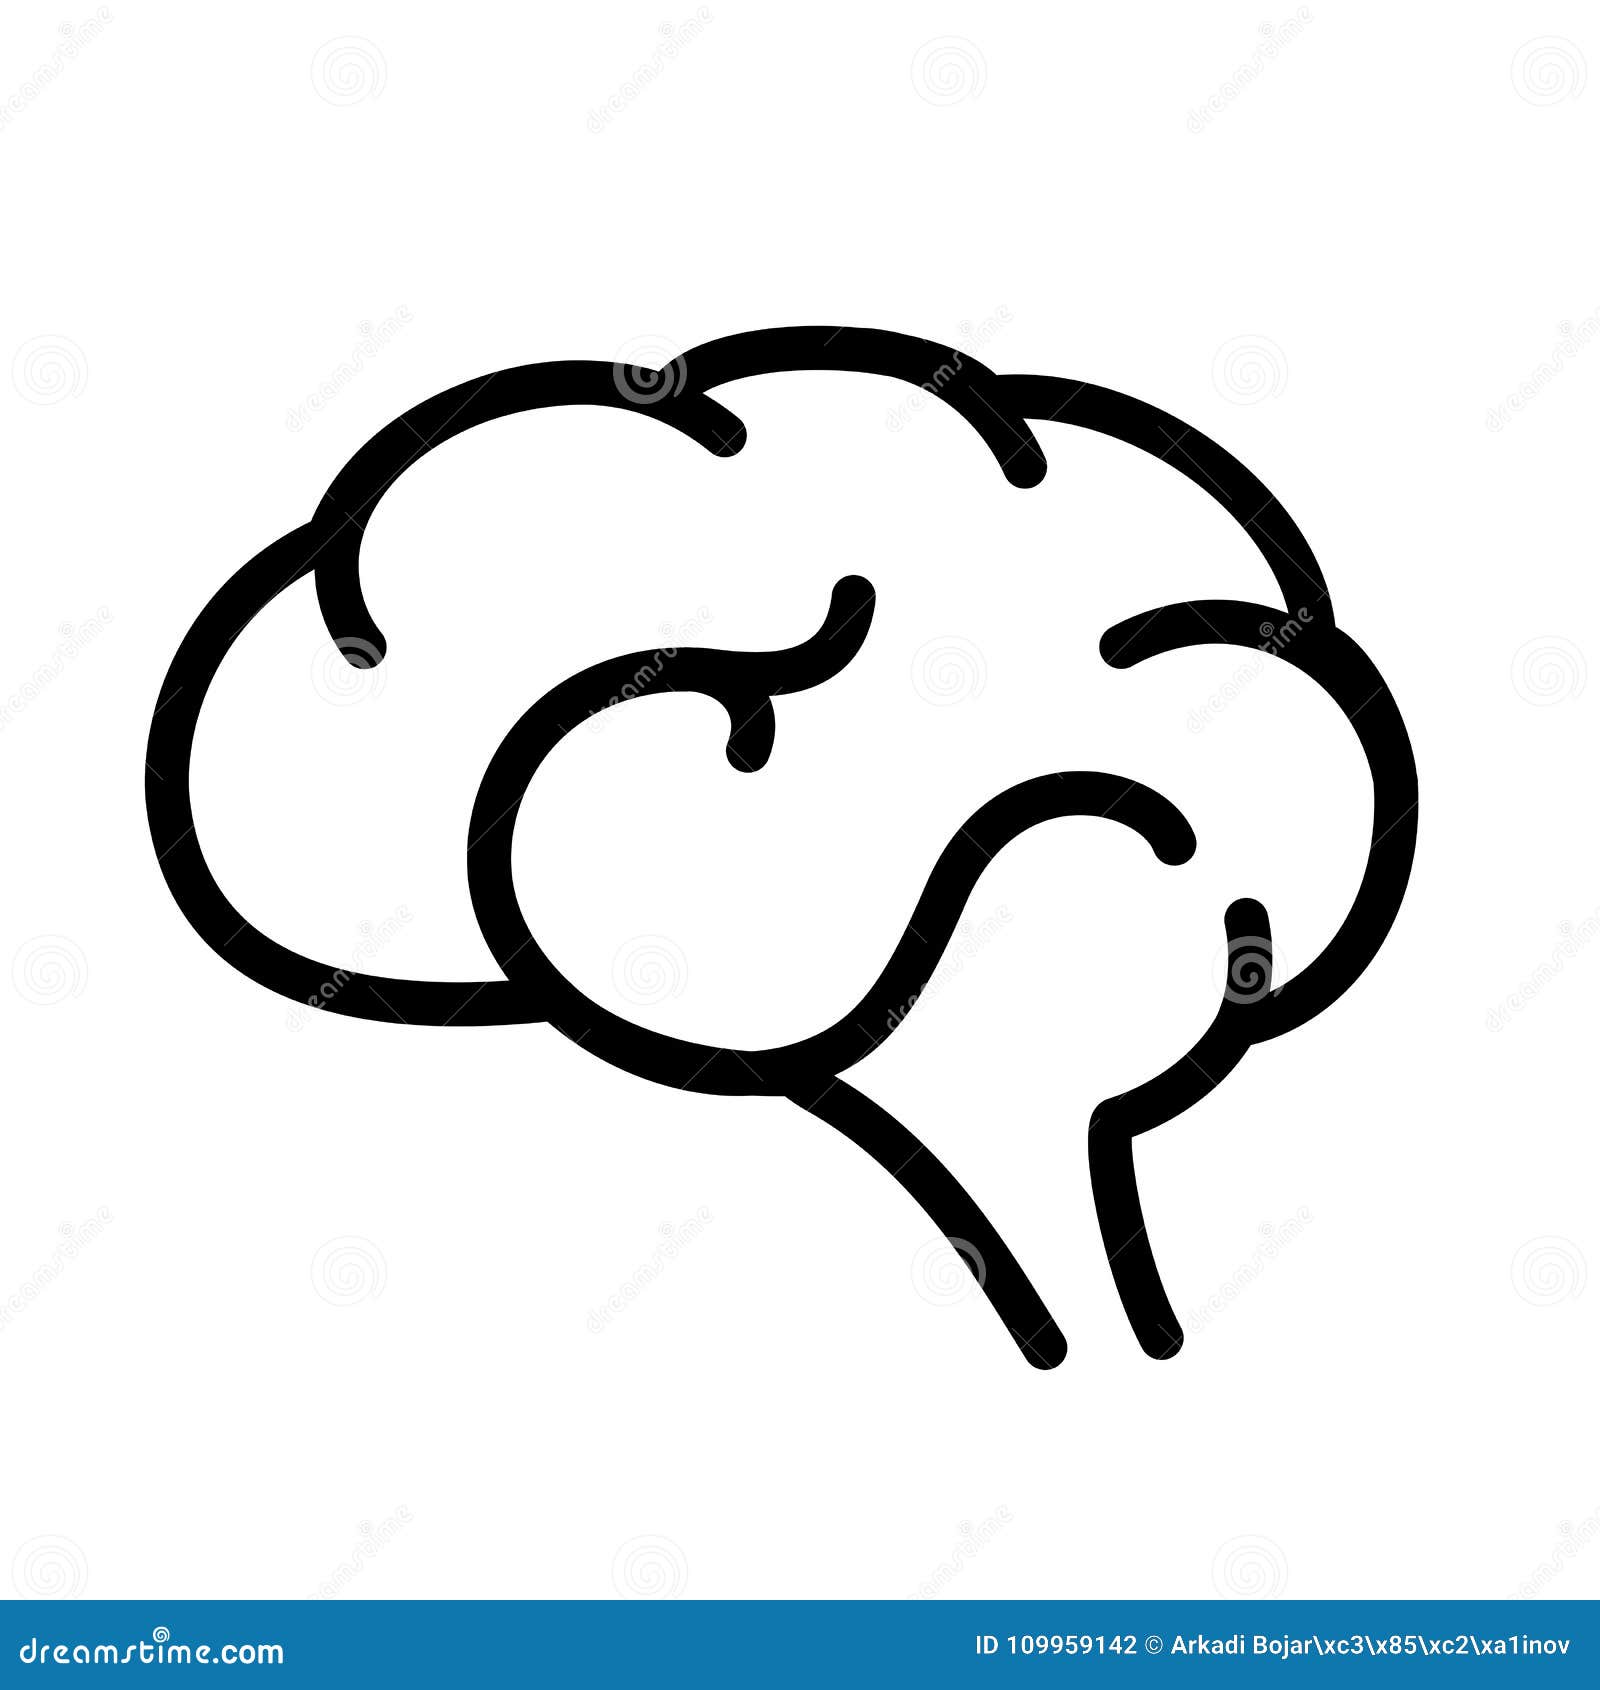 Brain outline vector icon stock vector. Illustration of intellect